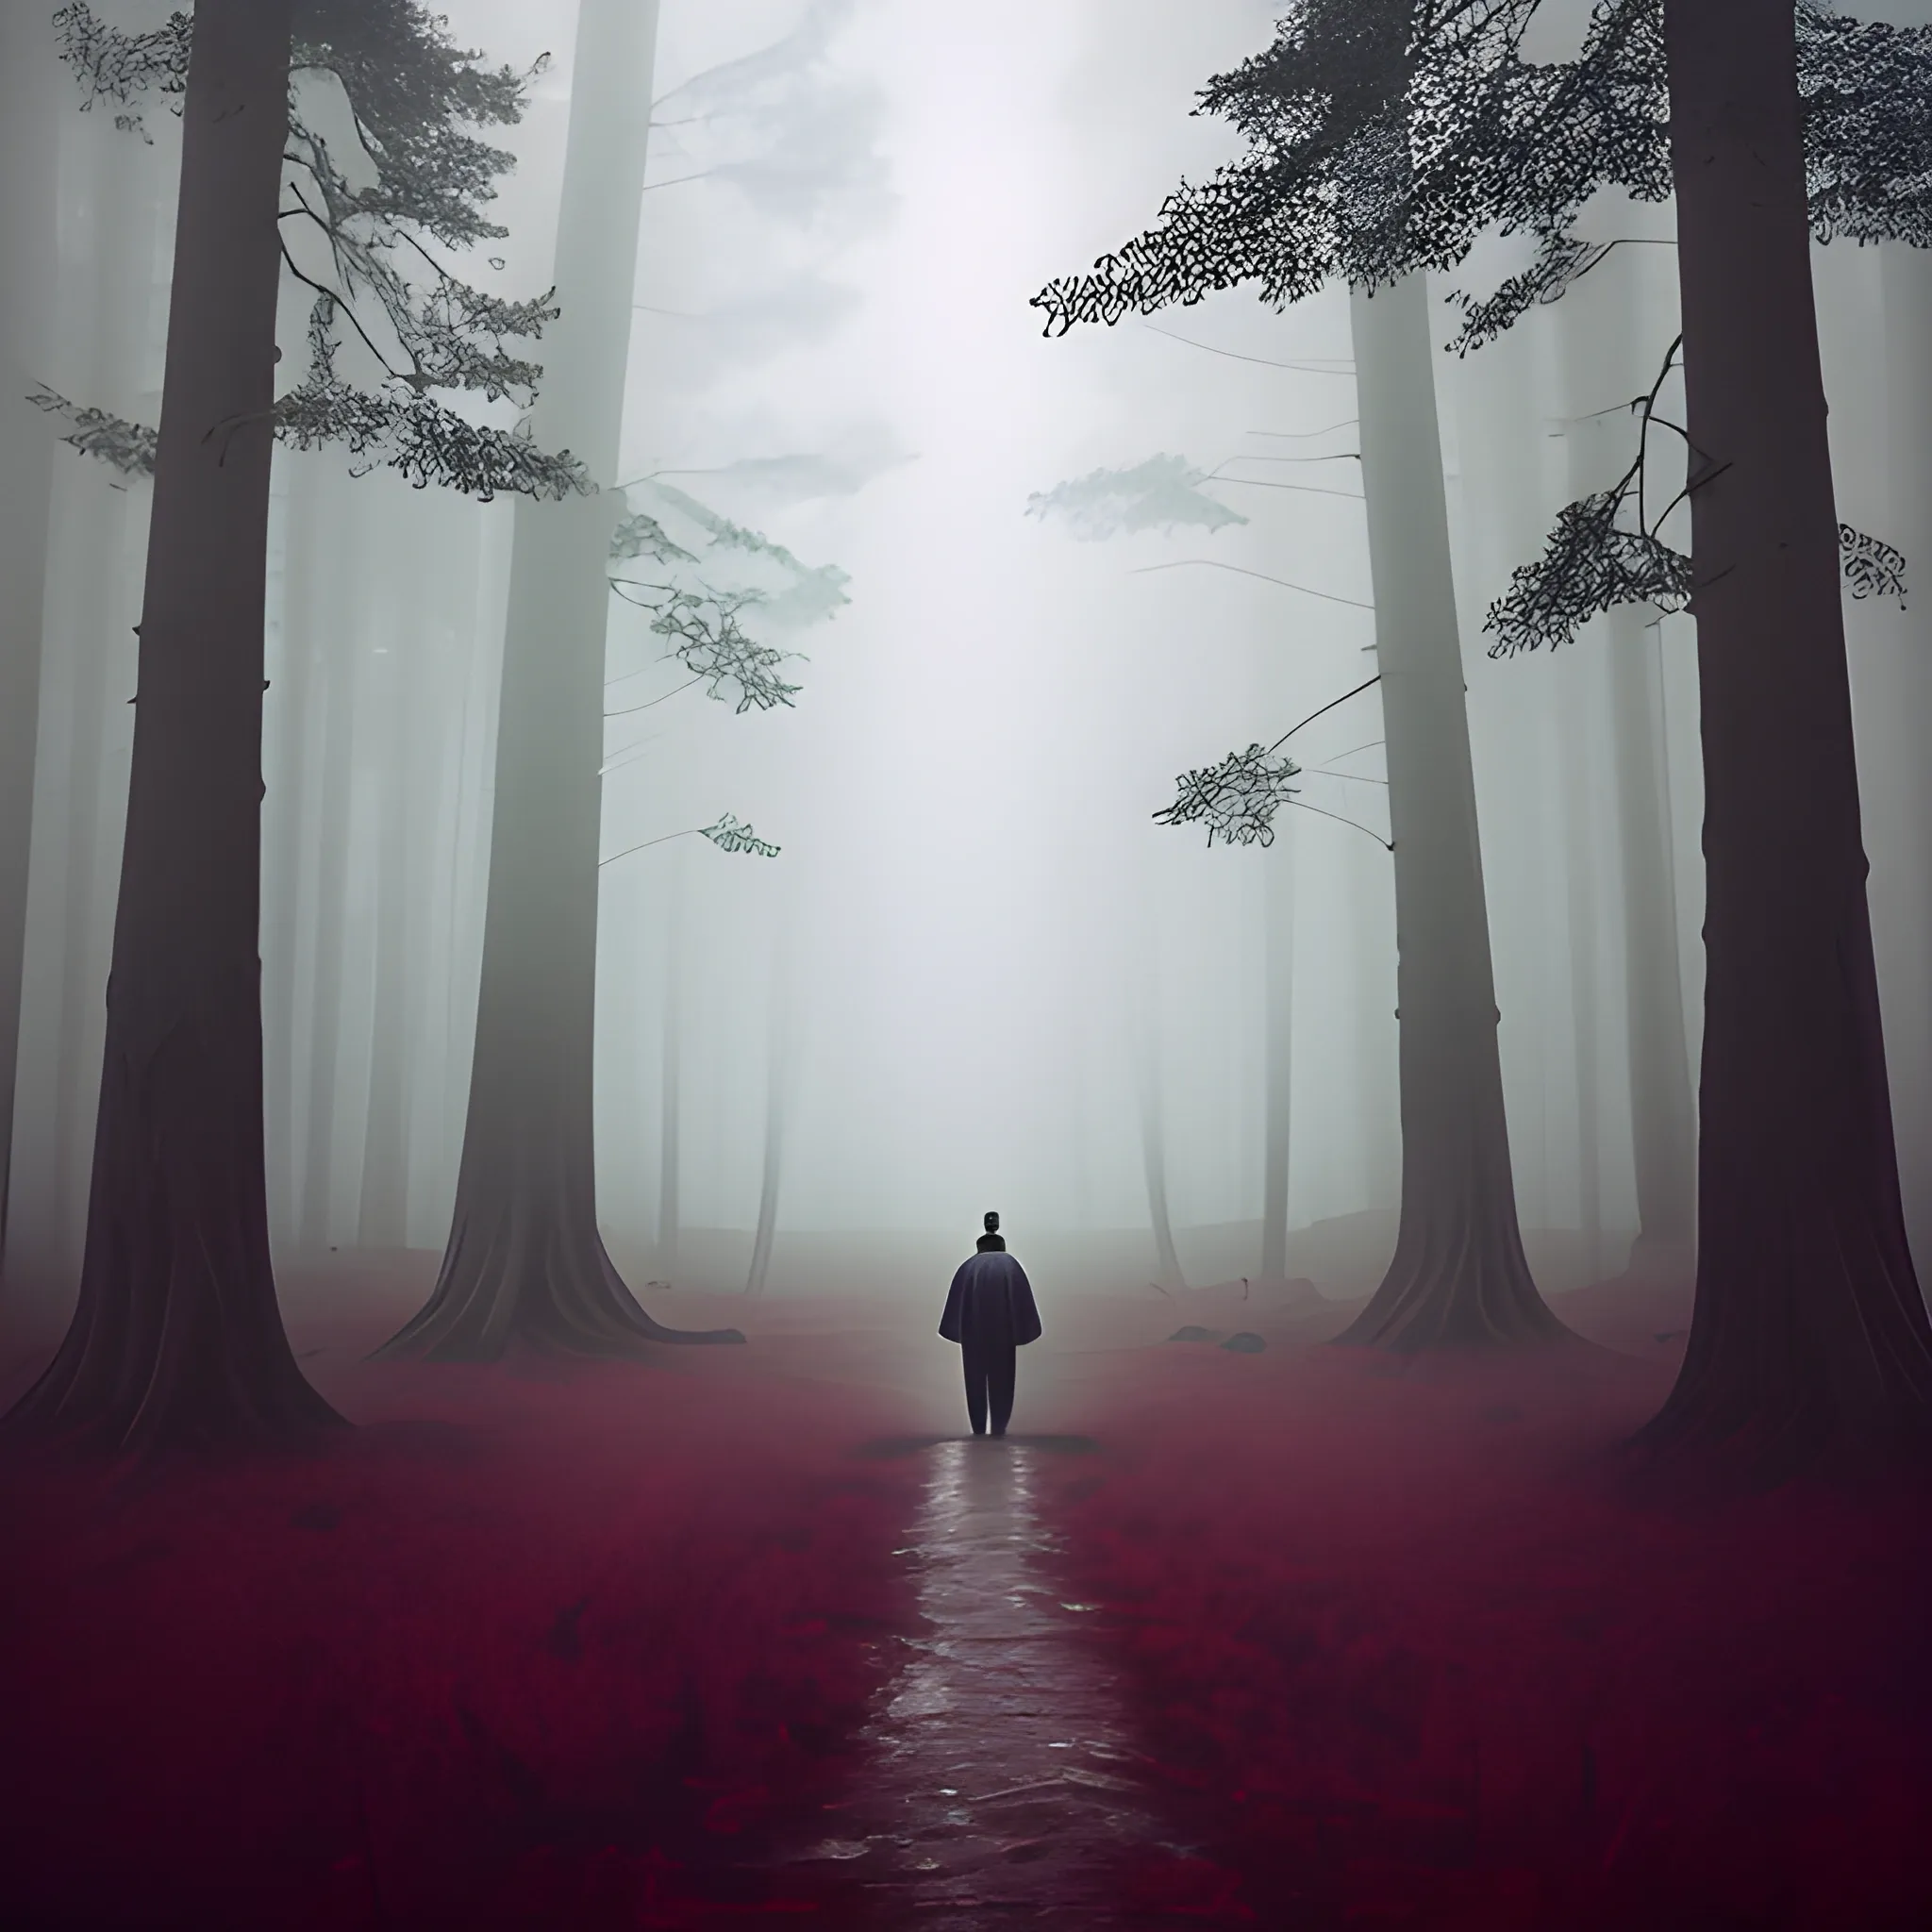 Lonely man in a black raincoat approaching a forest full of large trees and getting lost in the mist while in the background some thin red-eyed giants wait for him , Trippy